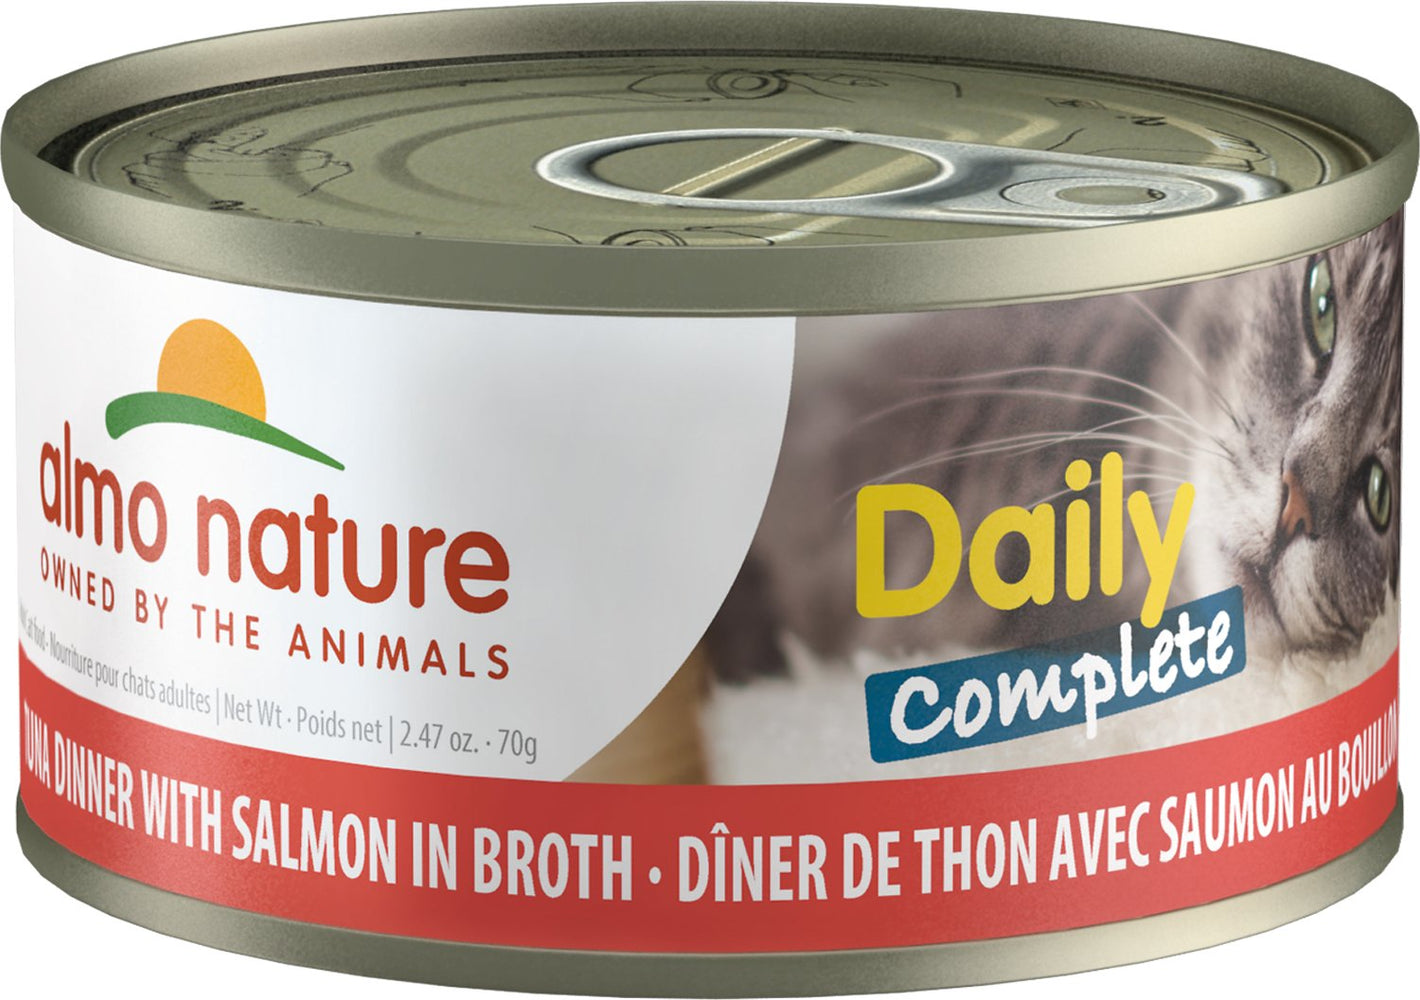 Almo Nature HQS Daily Complete Tuna Dinner With Salmon In Broth Canned Cat Food: 2.47- Oz, Case of 24